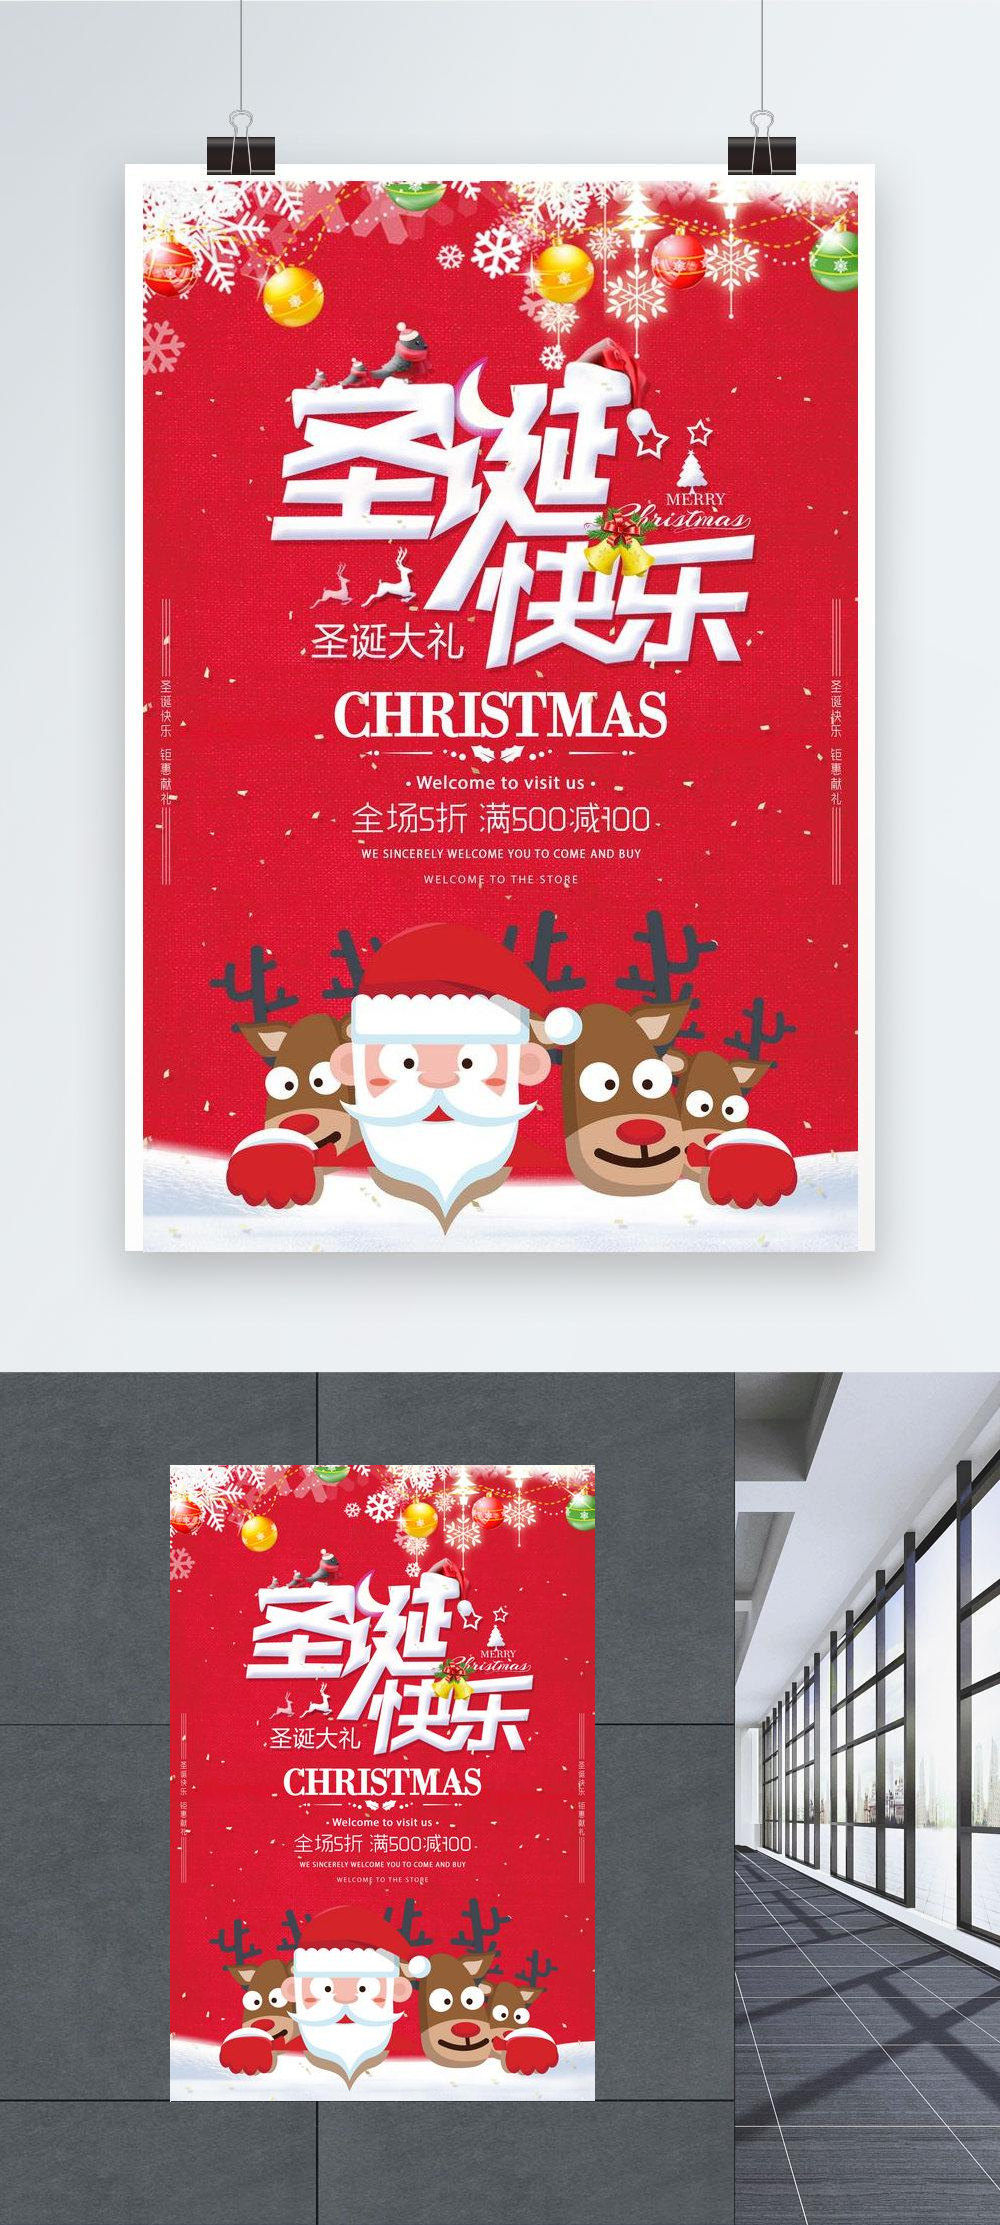 Download Creative Fashion Christmas Poster Template Image Picture Free Download 664828540 Lovepik Com Yellowimages Mockups